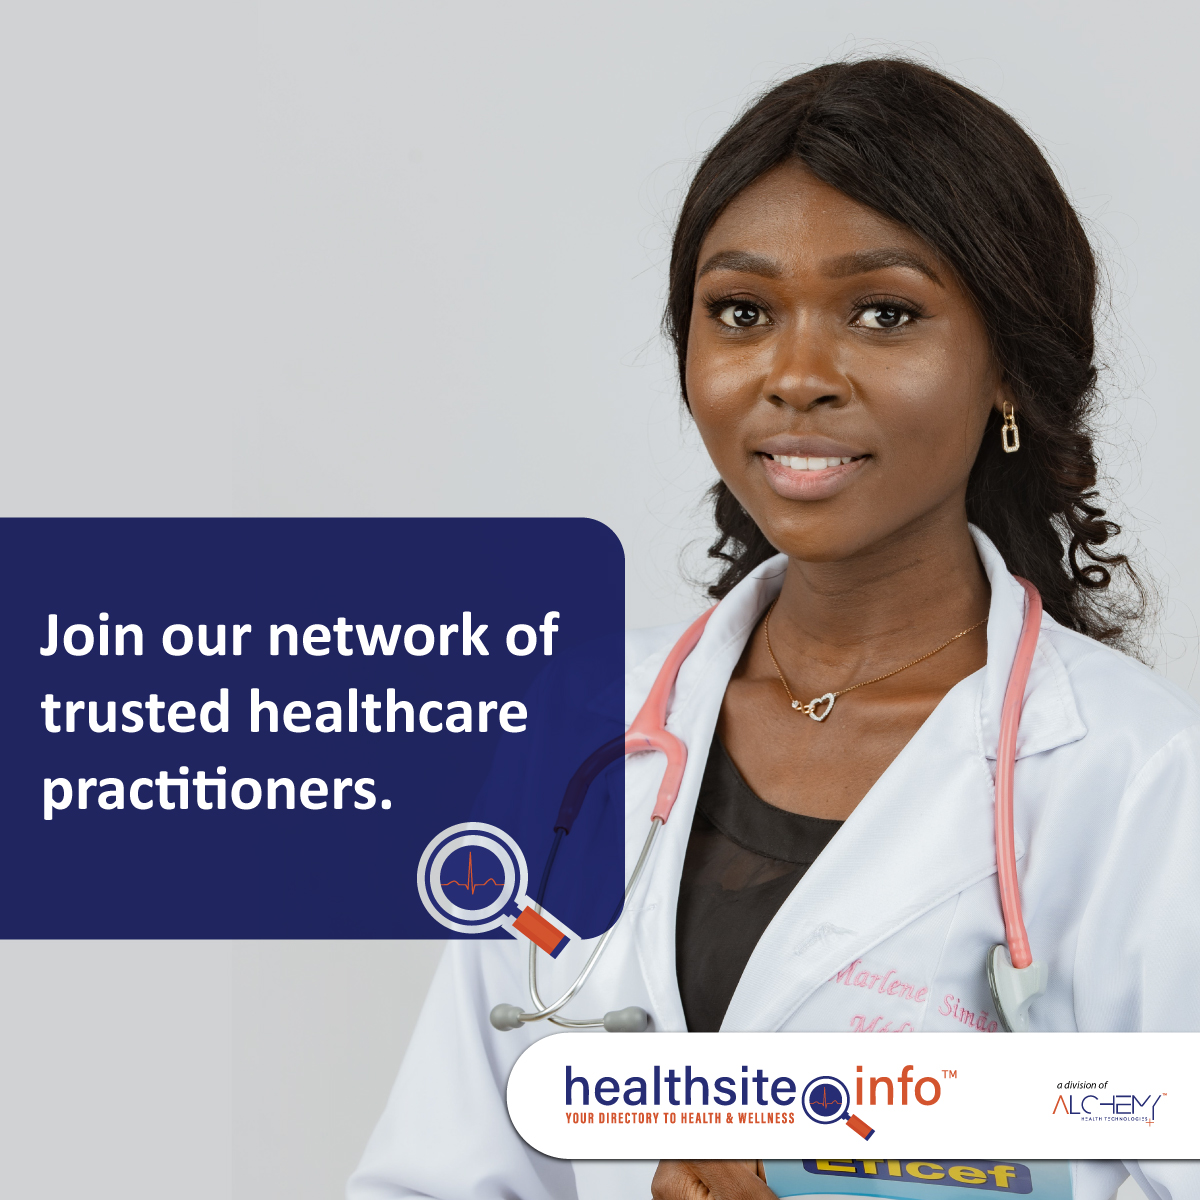 healthsite.info is a network of trusted and verified healthcare professionals. learn more about how you can be a part of our network. visit healthsite.info/p/onboarding #OnlineDirectory #HealthcareDirectory #MedicalProfessionals #Doctors #GPReferral #DrNearMe #FindADrNearMe